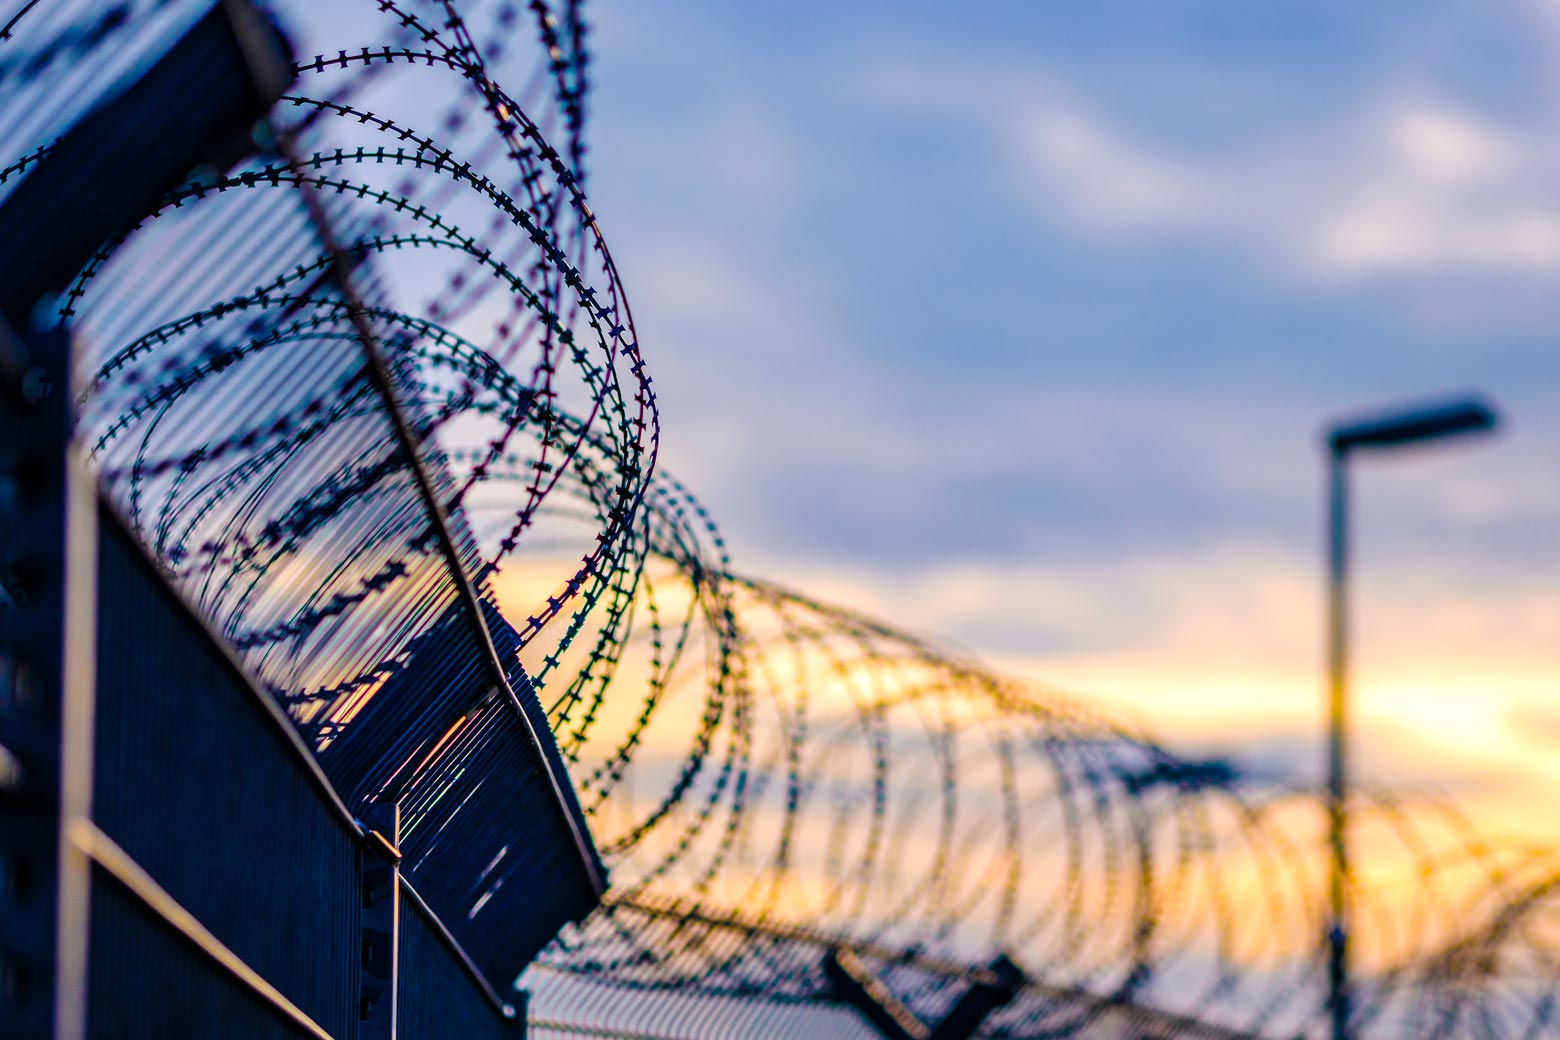 Barbed wire on the top of a fence at a correctional facility.